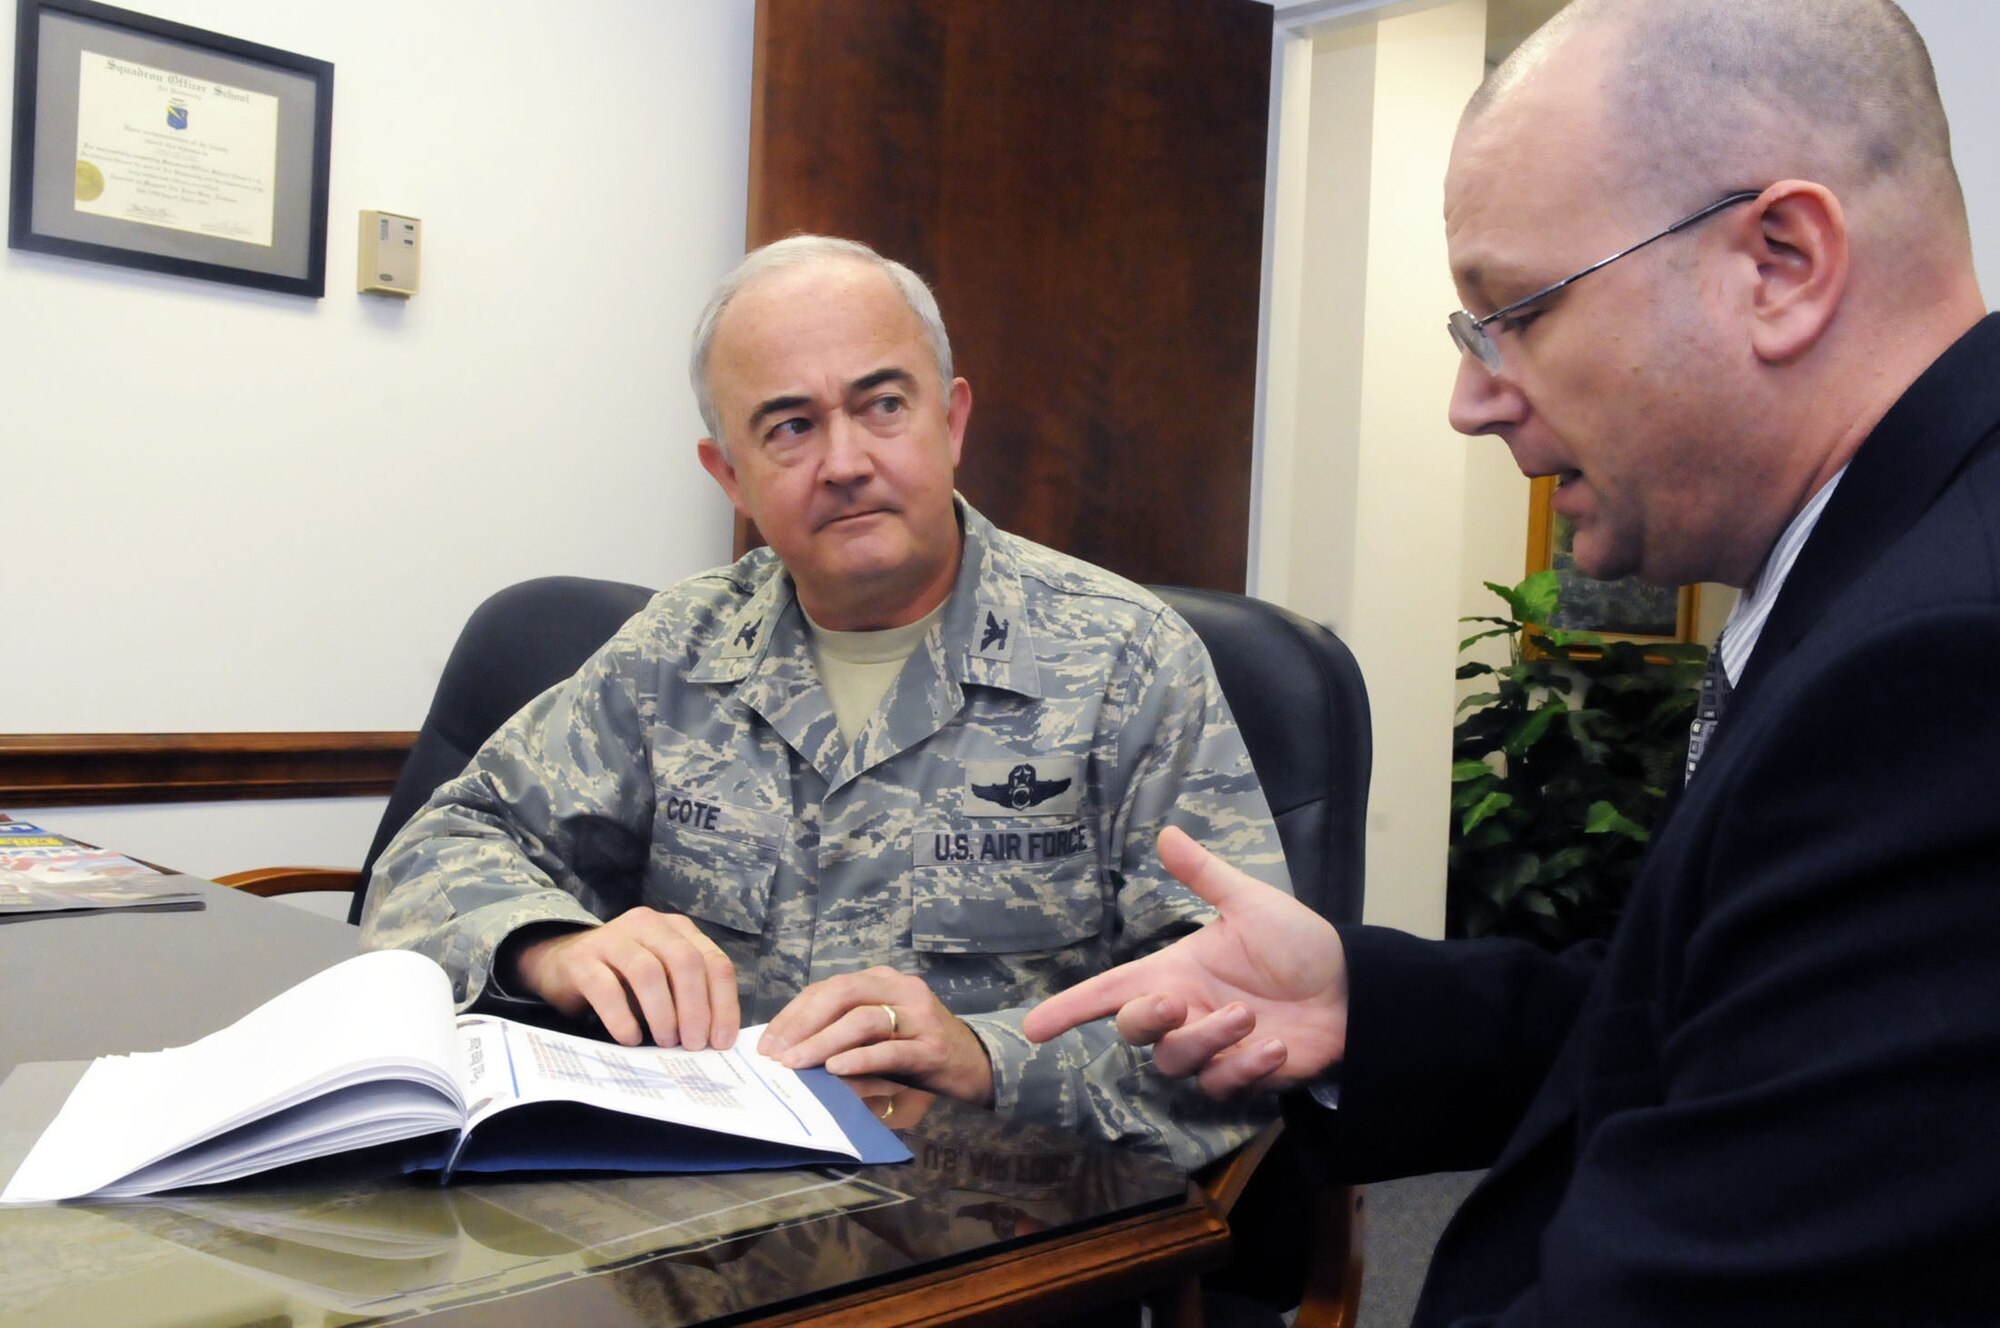 Col. John Cote, 78th ABW Inspector General and Tony Congi, Deputy IG, go over a training presentation looking for ways to hone and improve upon it. U. S. Air Force photo by Sue Sapp